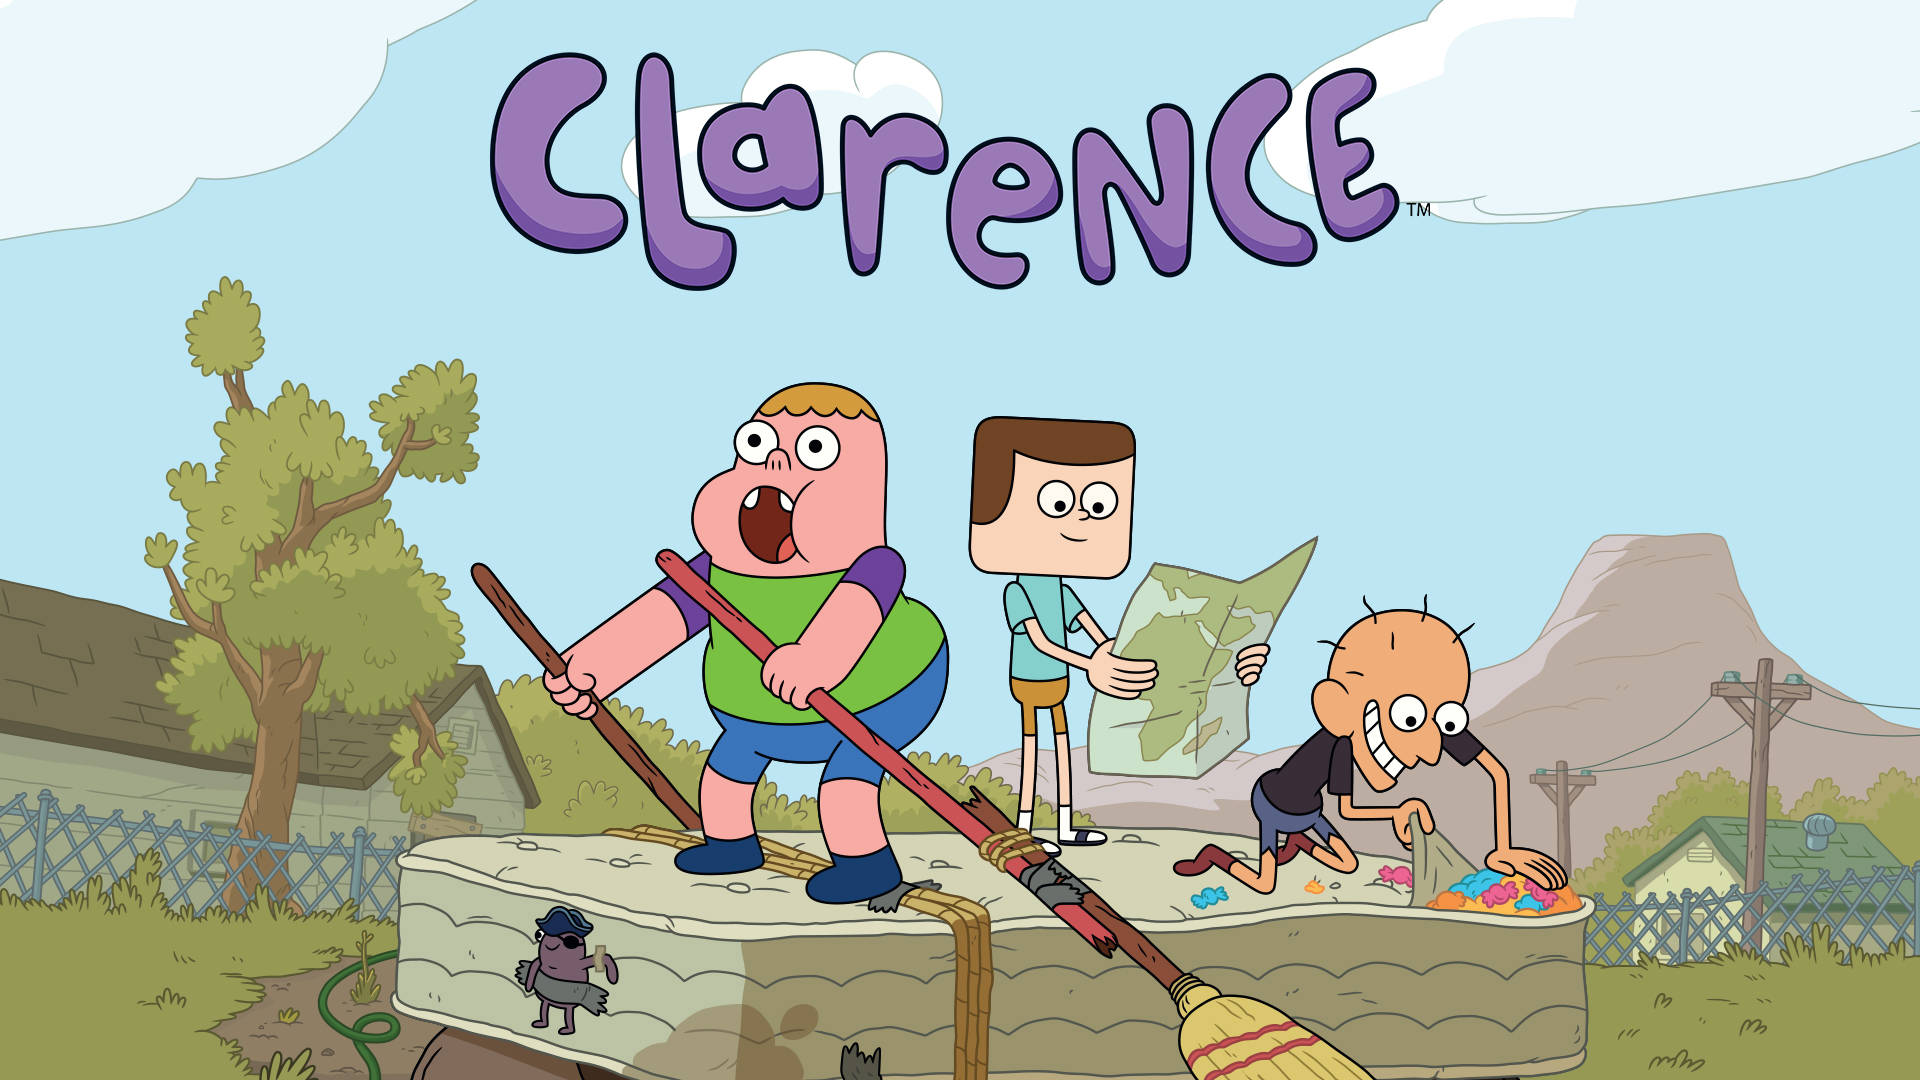 Clarence Wallpaper